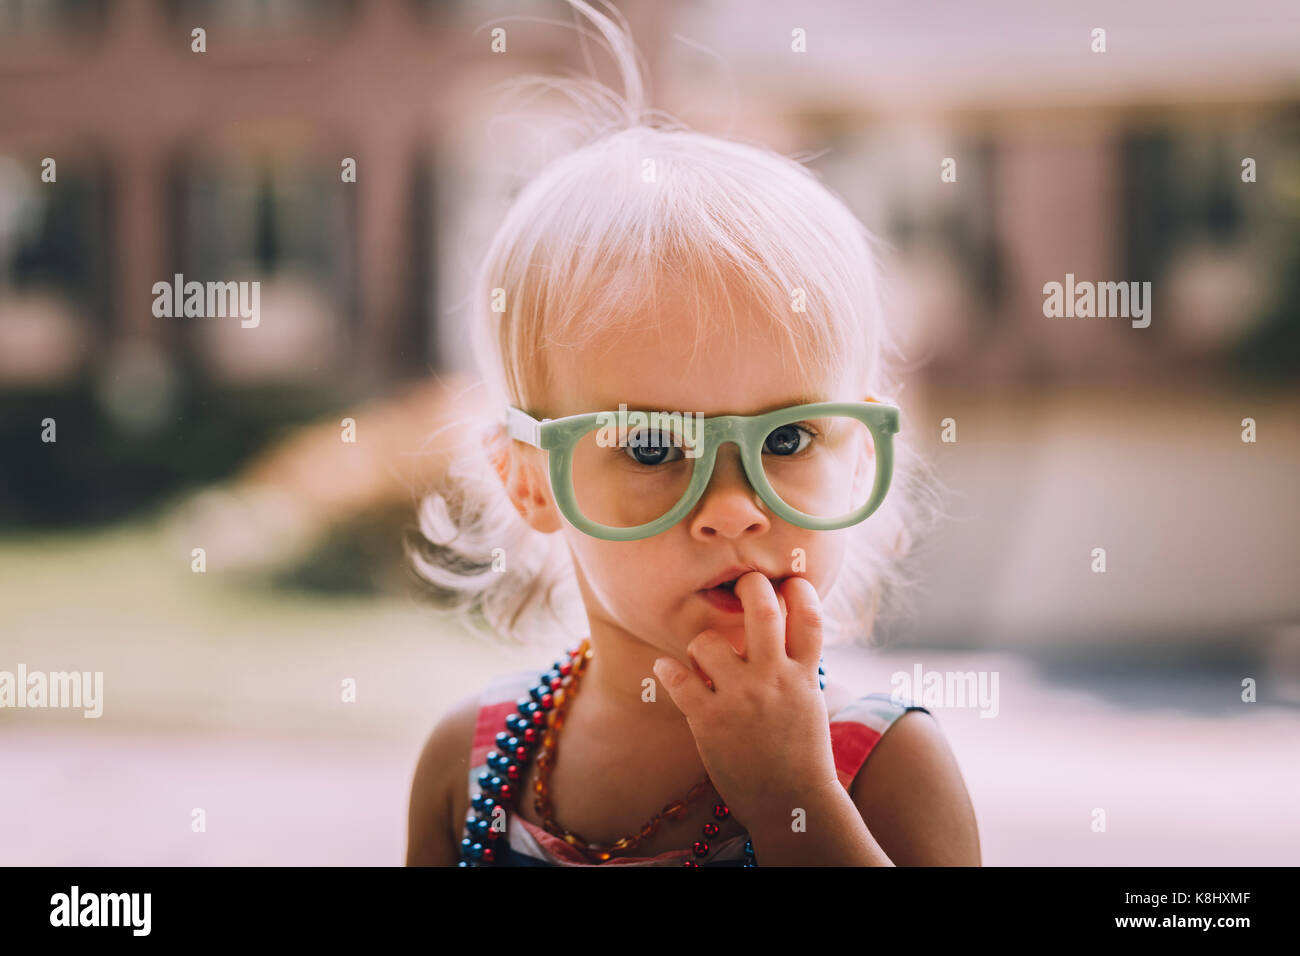 Portrait of cute baby girl wearing eyeglasses with finger in mouth Stock Photo